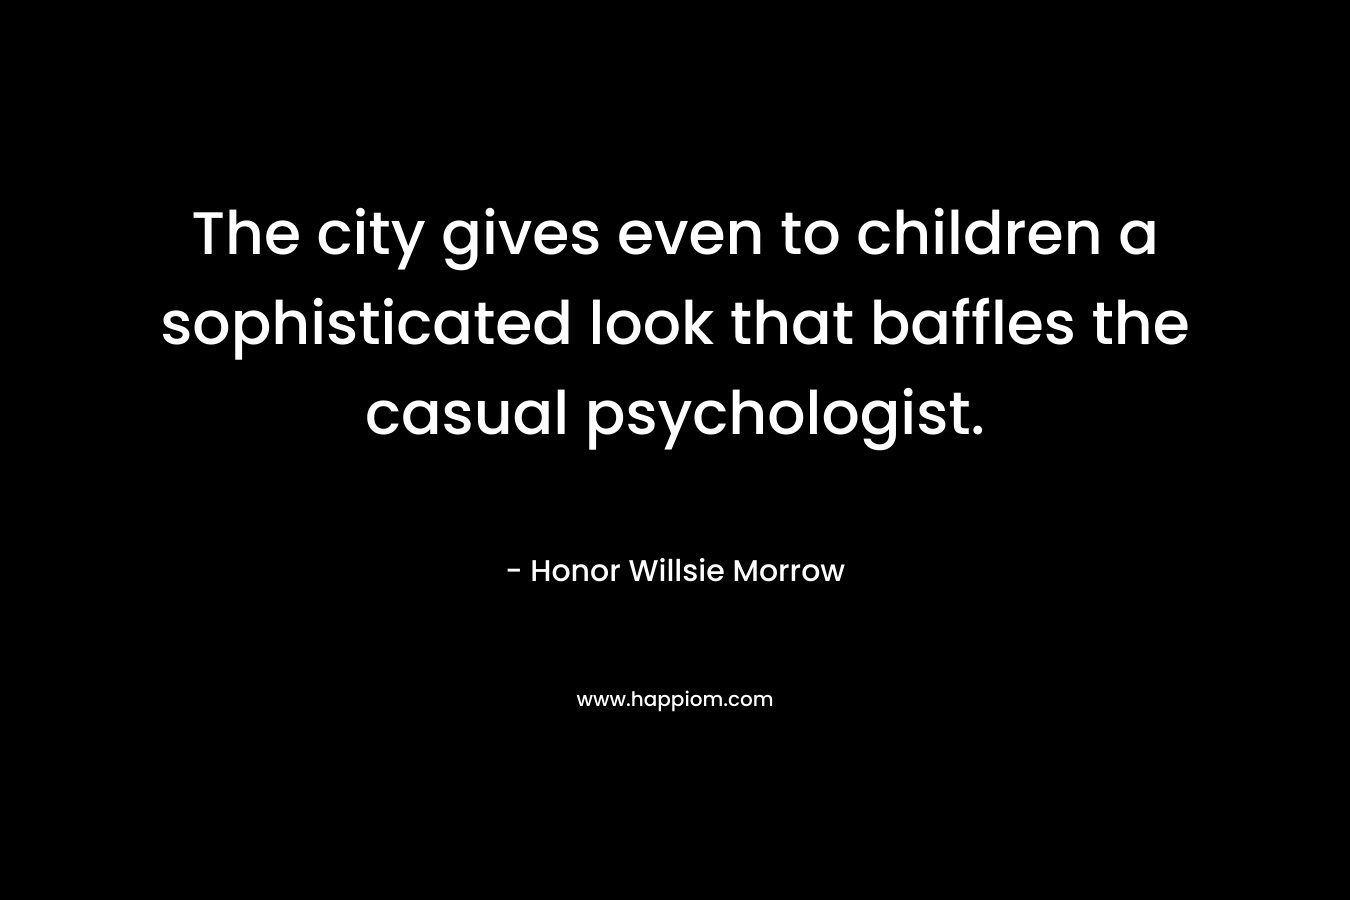 The city gives even to children a sophisticated look that baffles the casual psychologist.